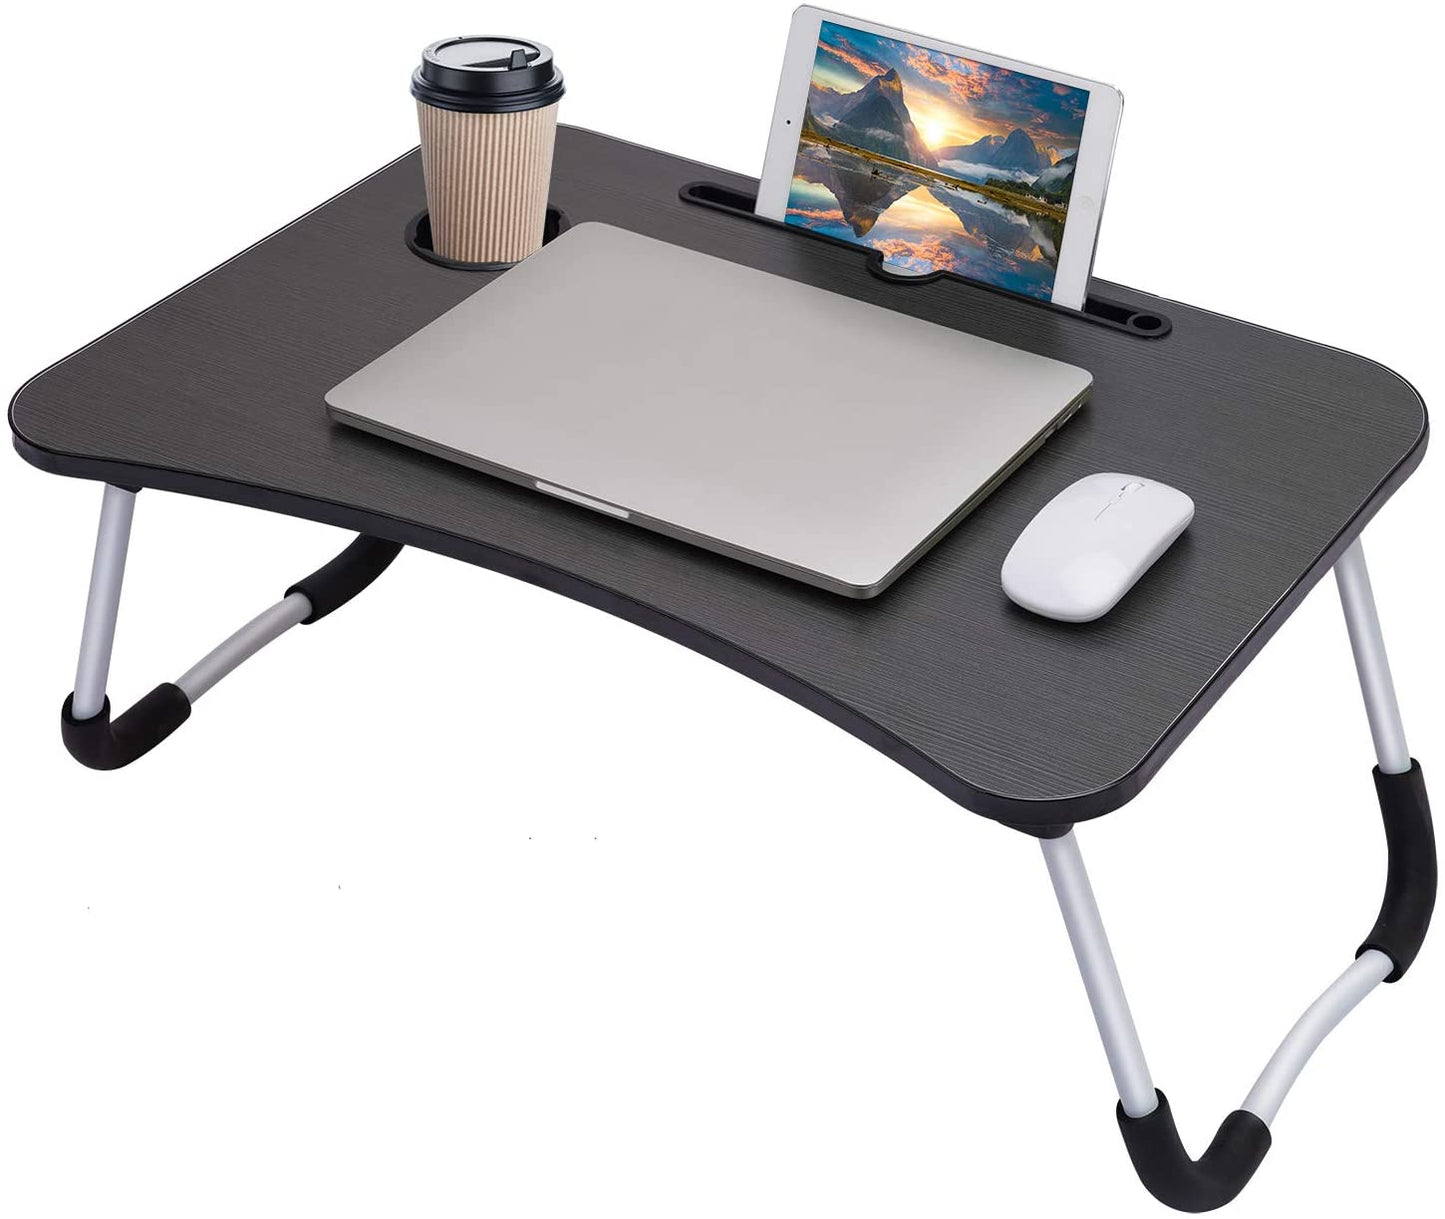 Wooden Multipurpose Laptop Table, Portable Study Bed Table, Breakfast Serving Bed Tray with Cup Holder & Mobile Tablet Holder (Black)